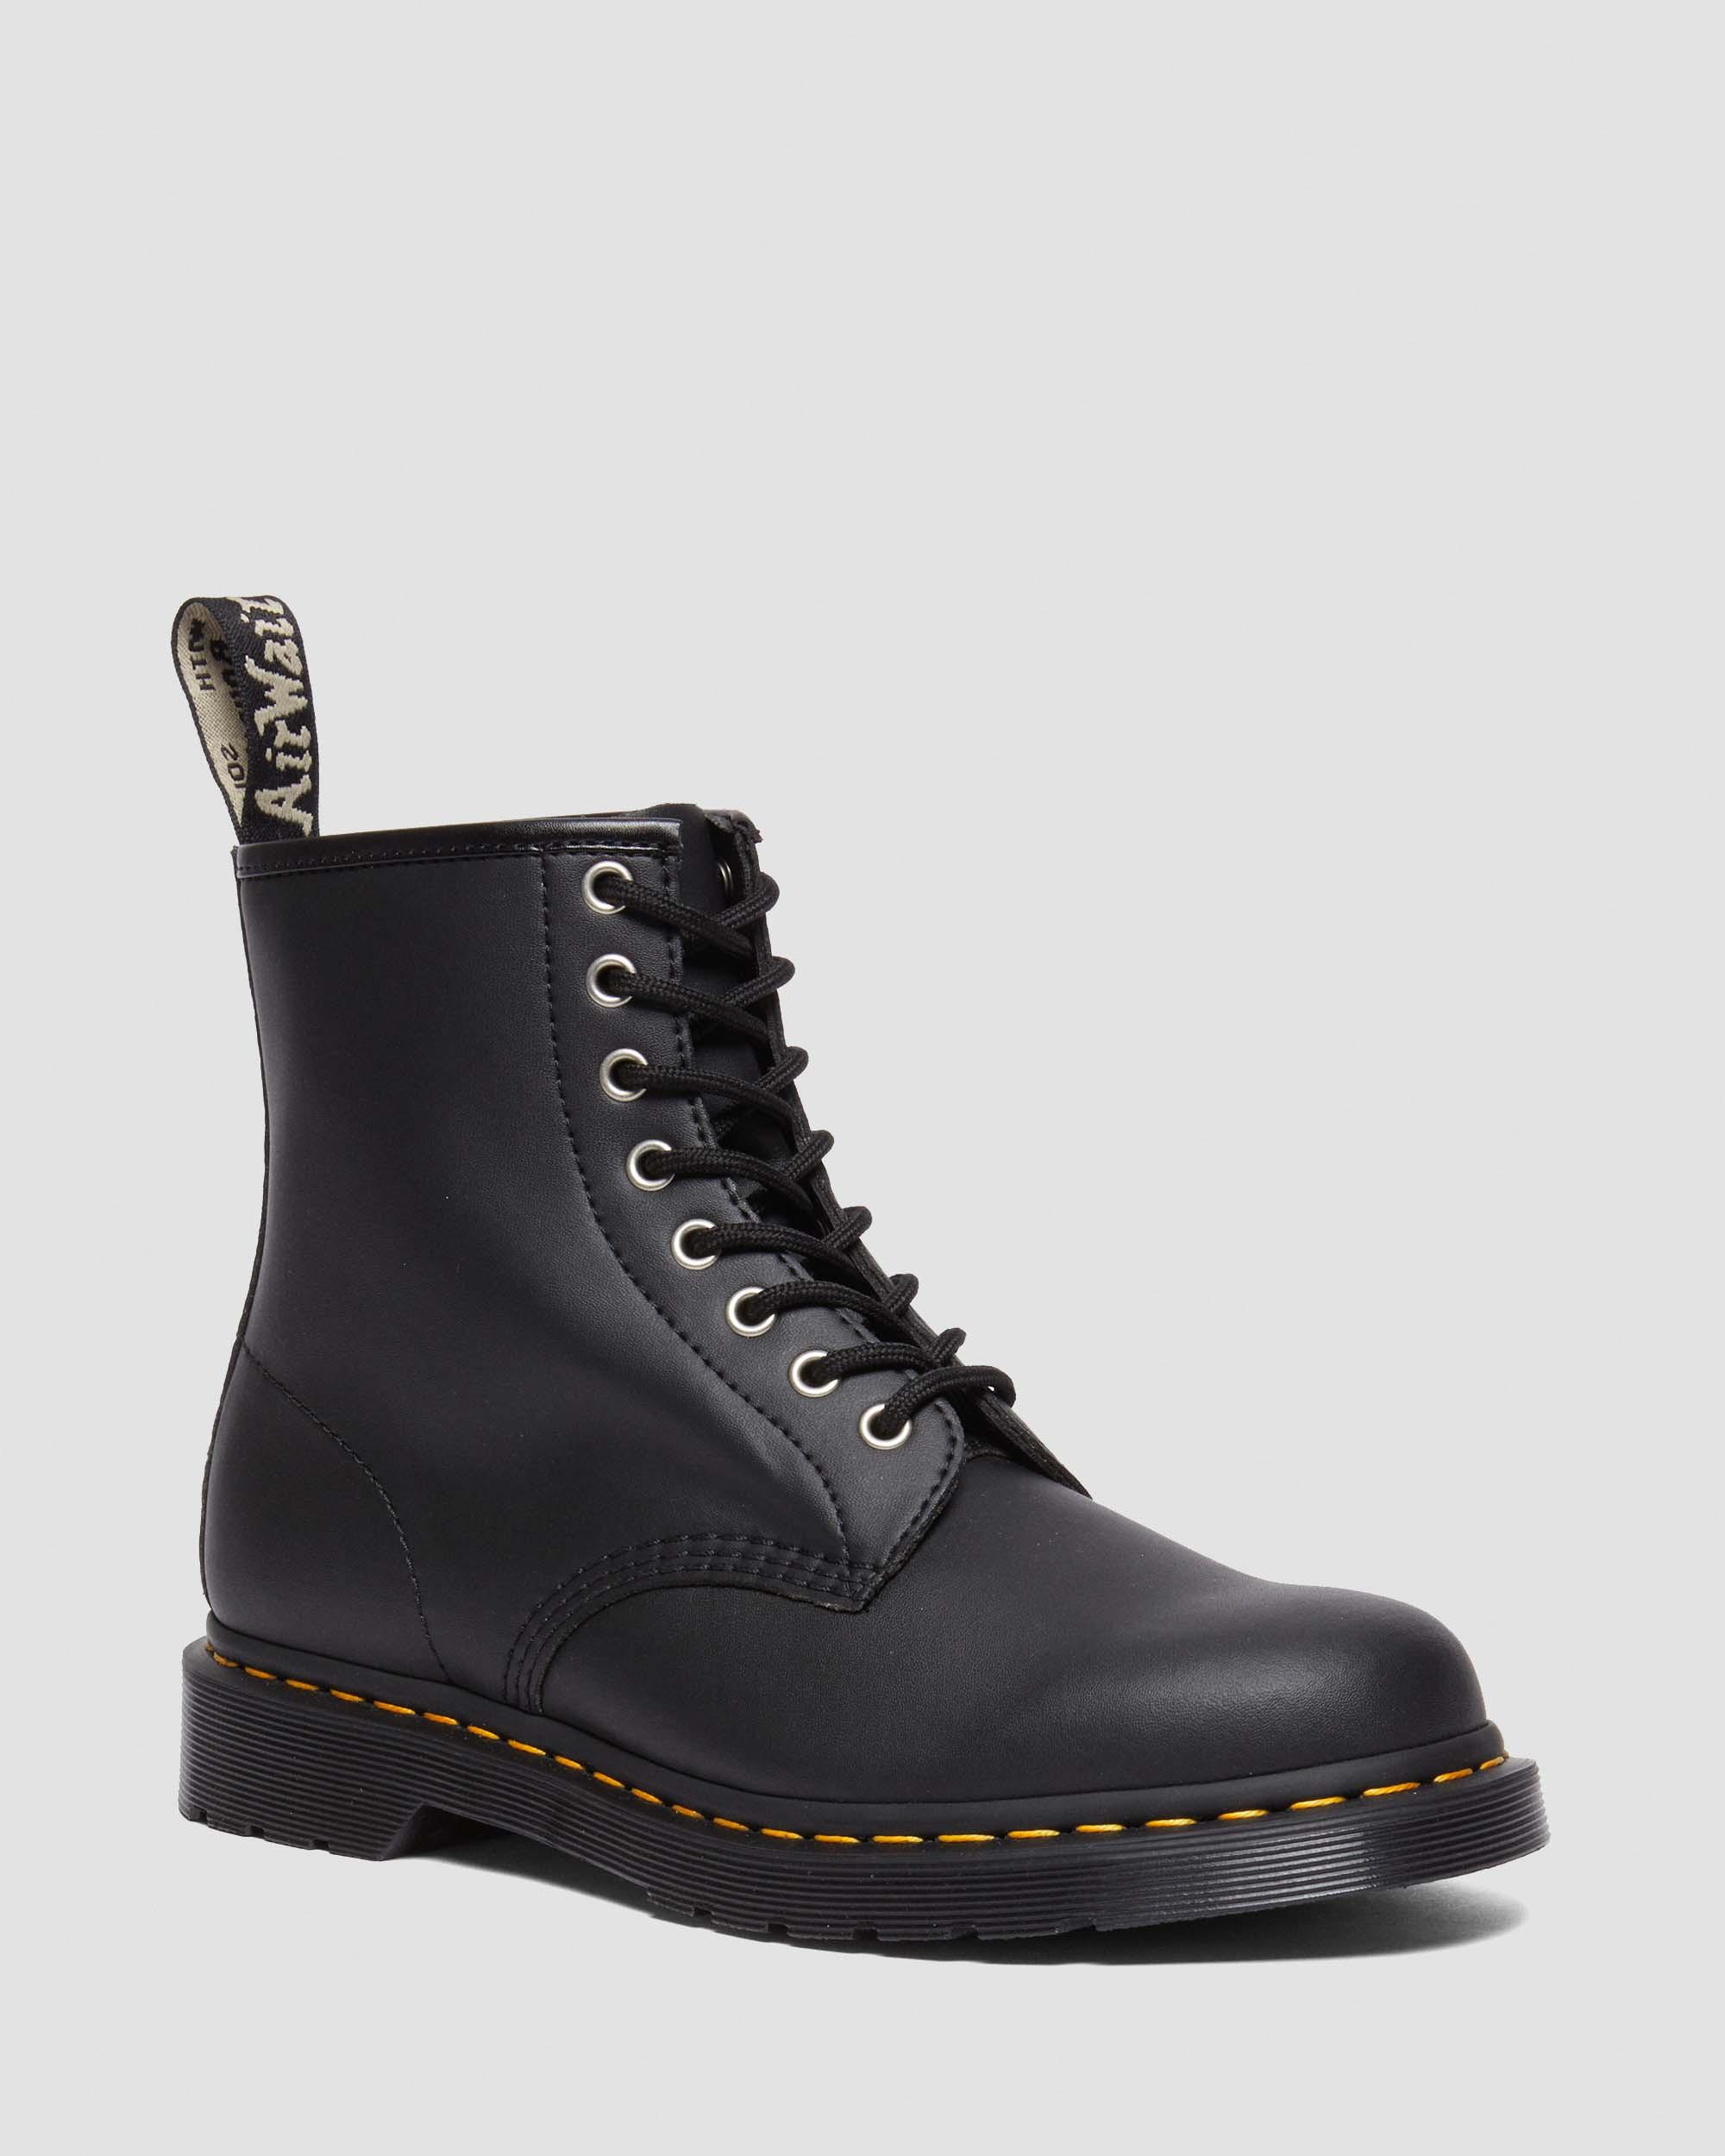 1460 Reclaimed Leather Lace Up Boots1460 Reclaimed Leather Lace Up Boots Dr. Martens